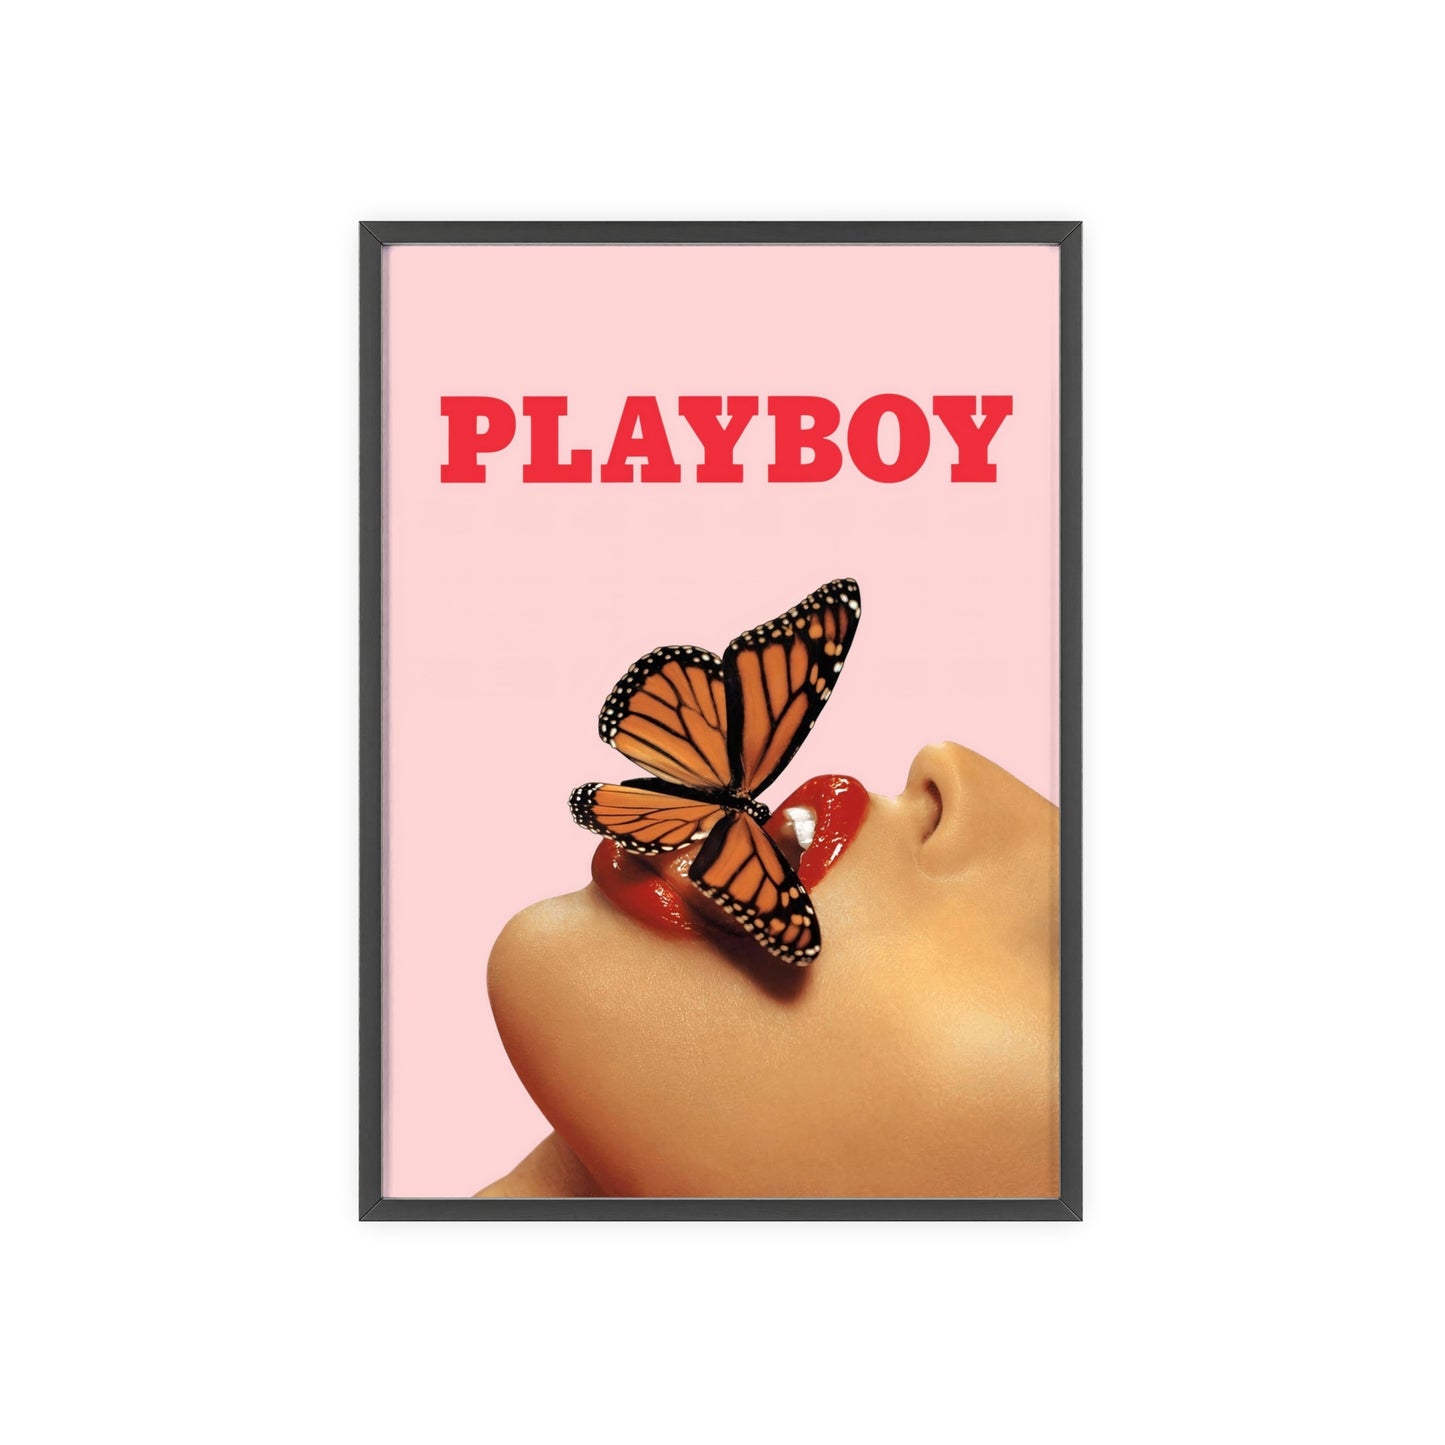 Playboy Vintage Butterfly Poster